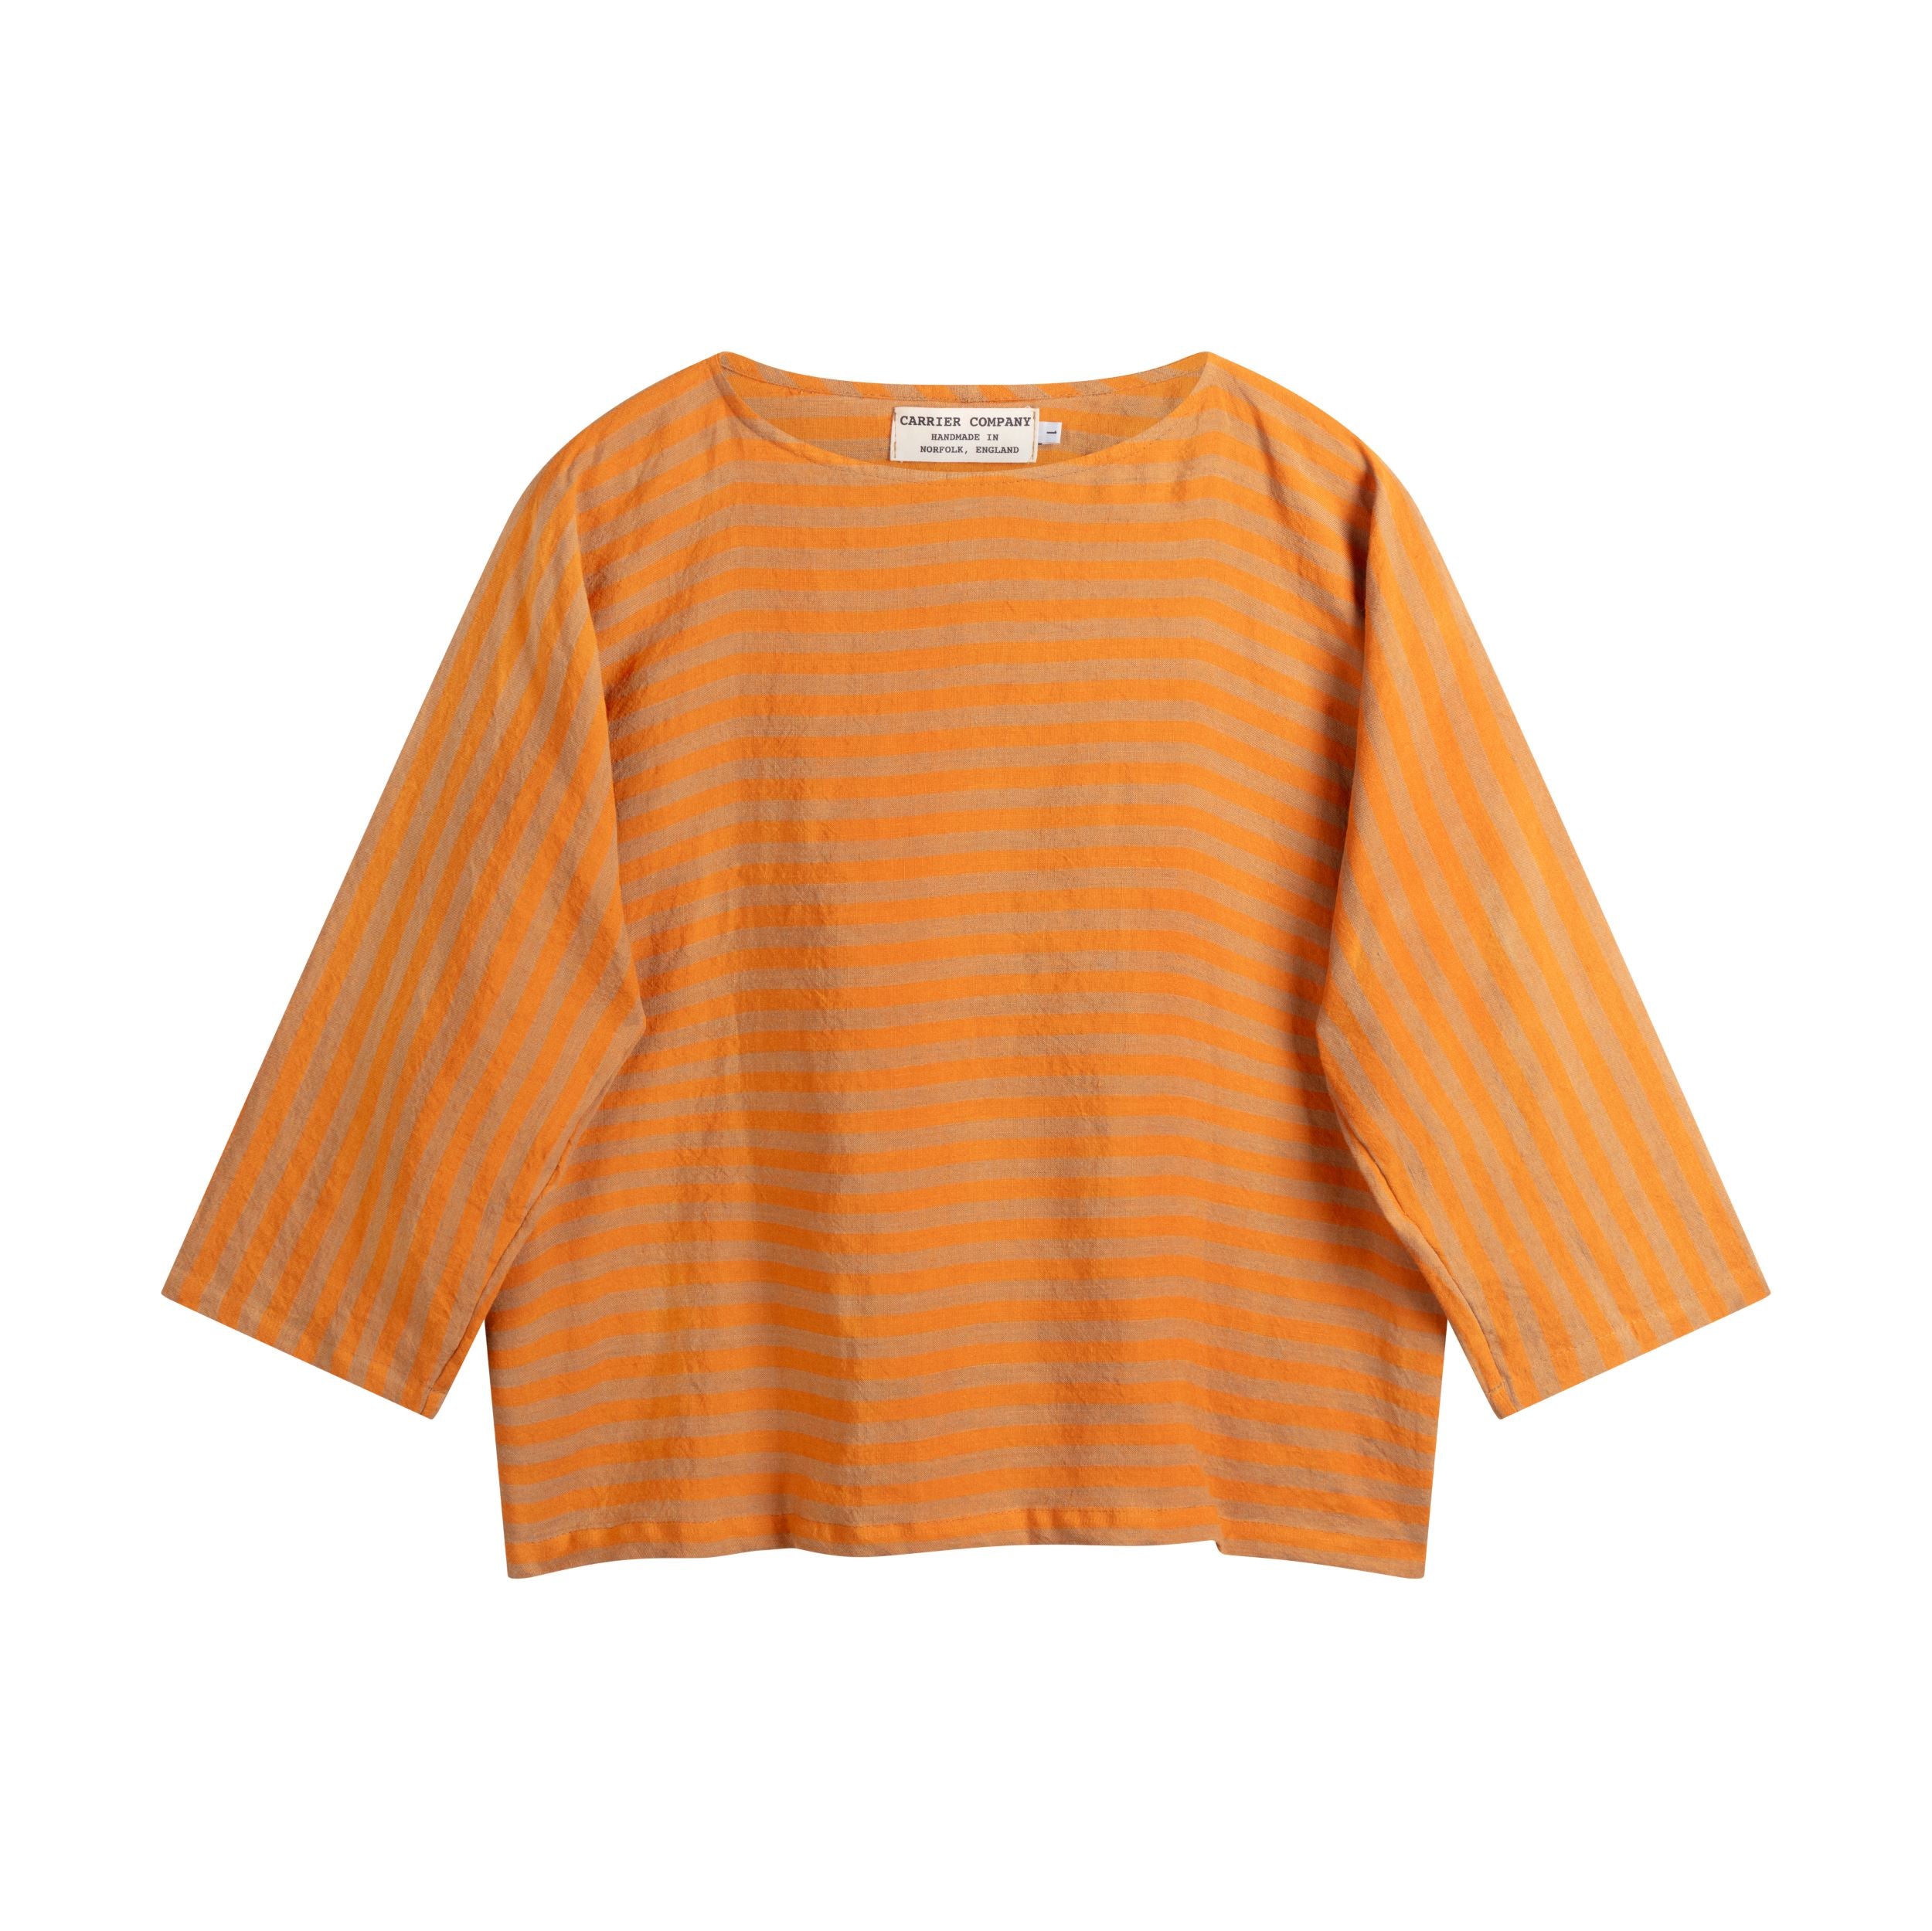 Carrier Company Linen Tee Shirt in Orange and Brown Stripe